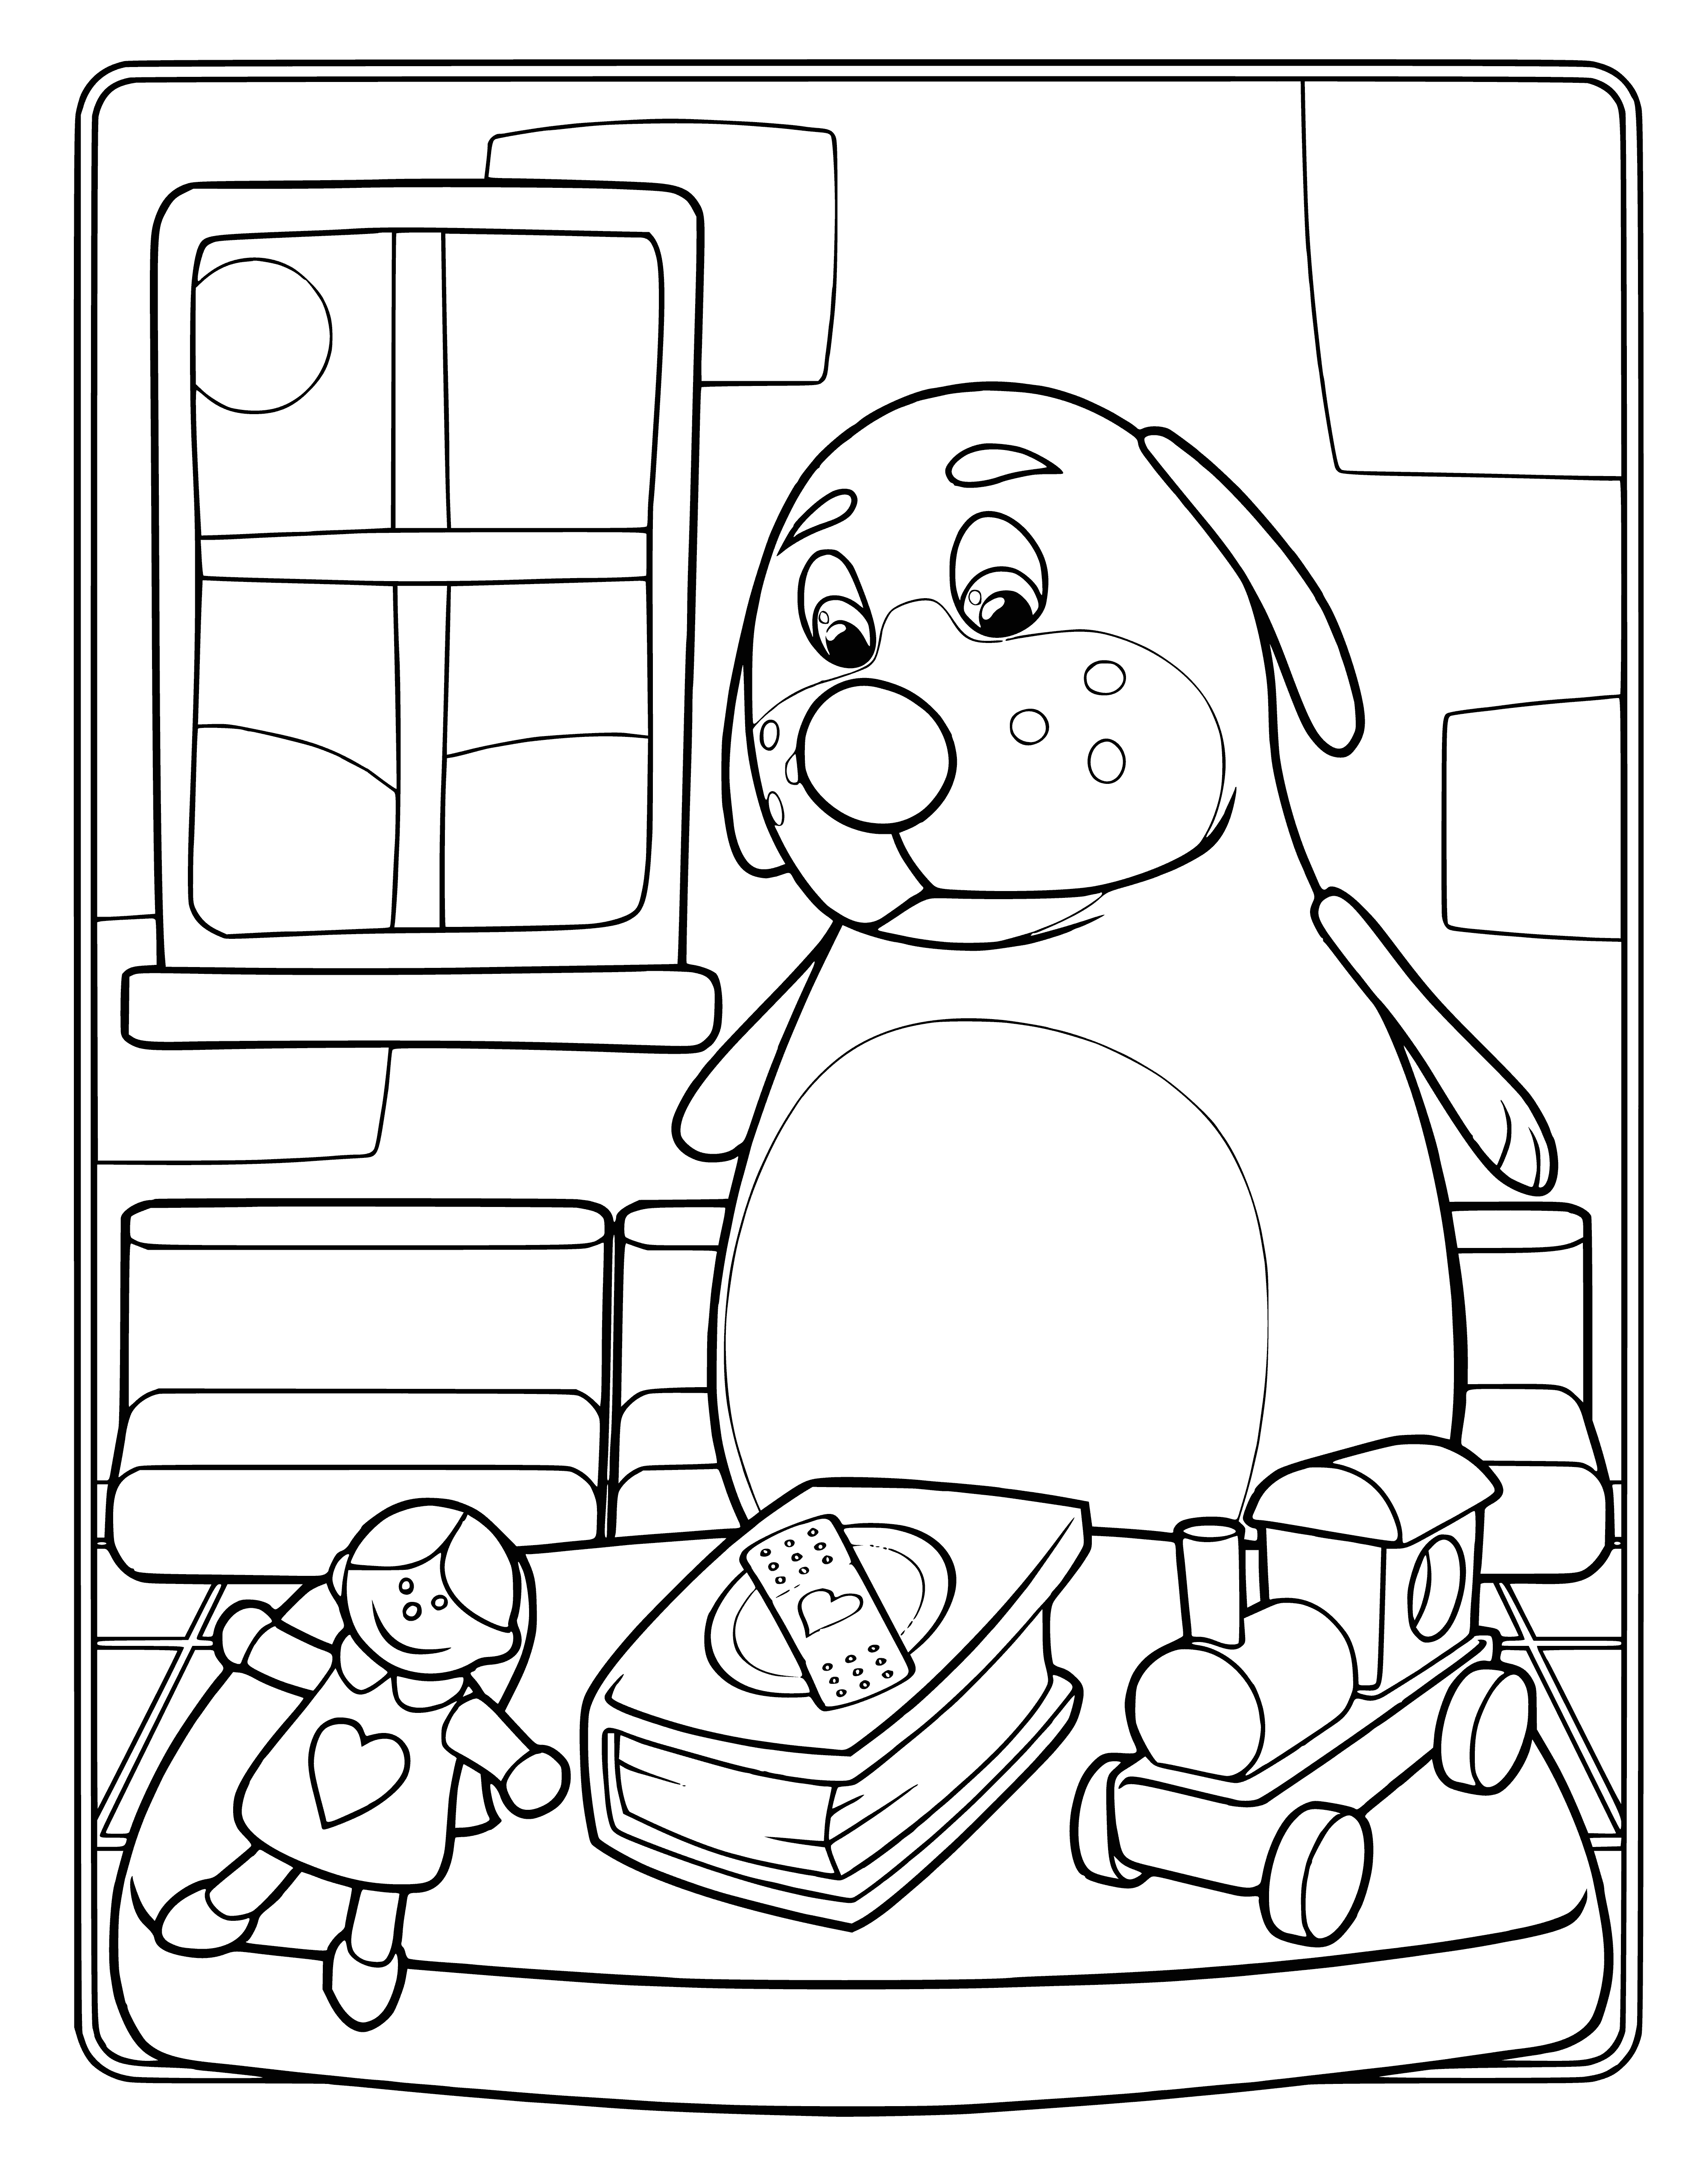 Inflatable dog coloring page